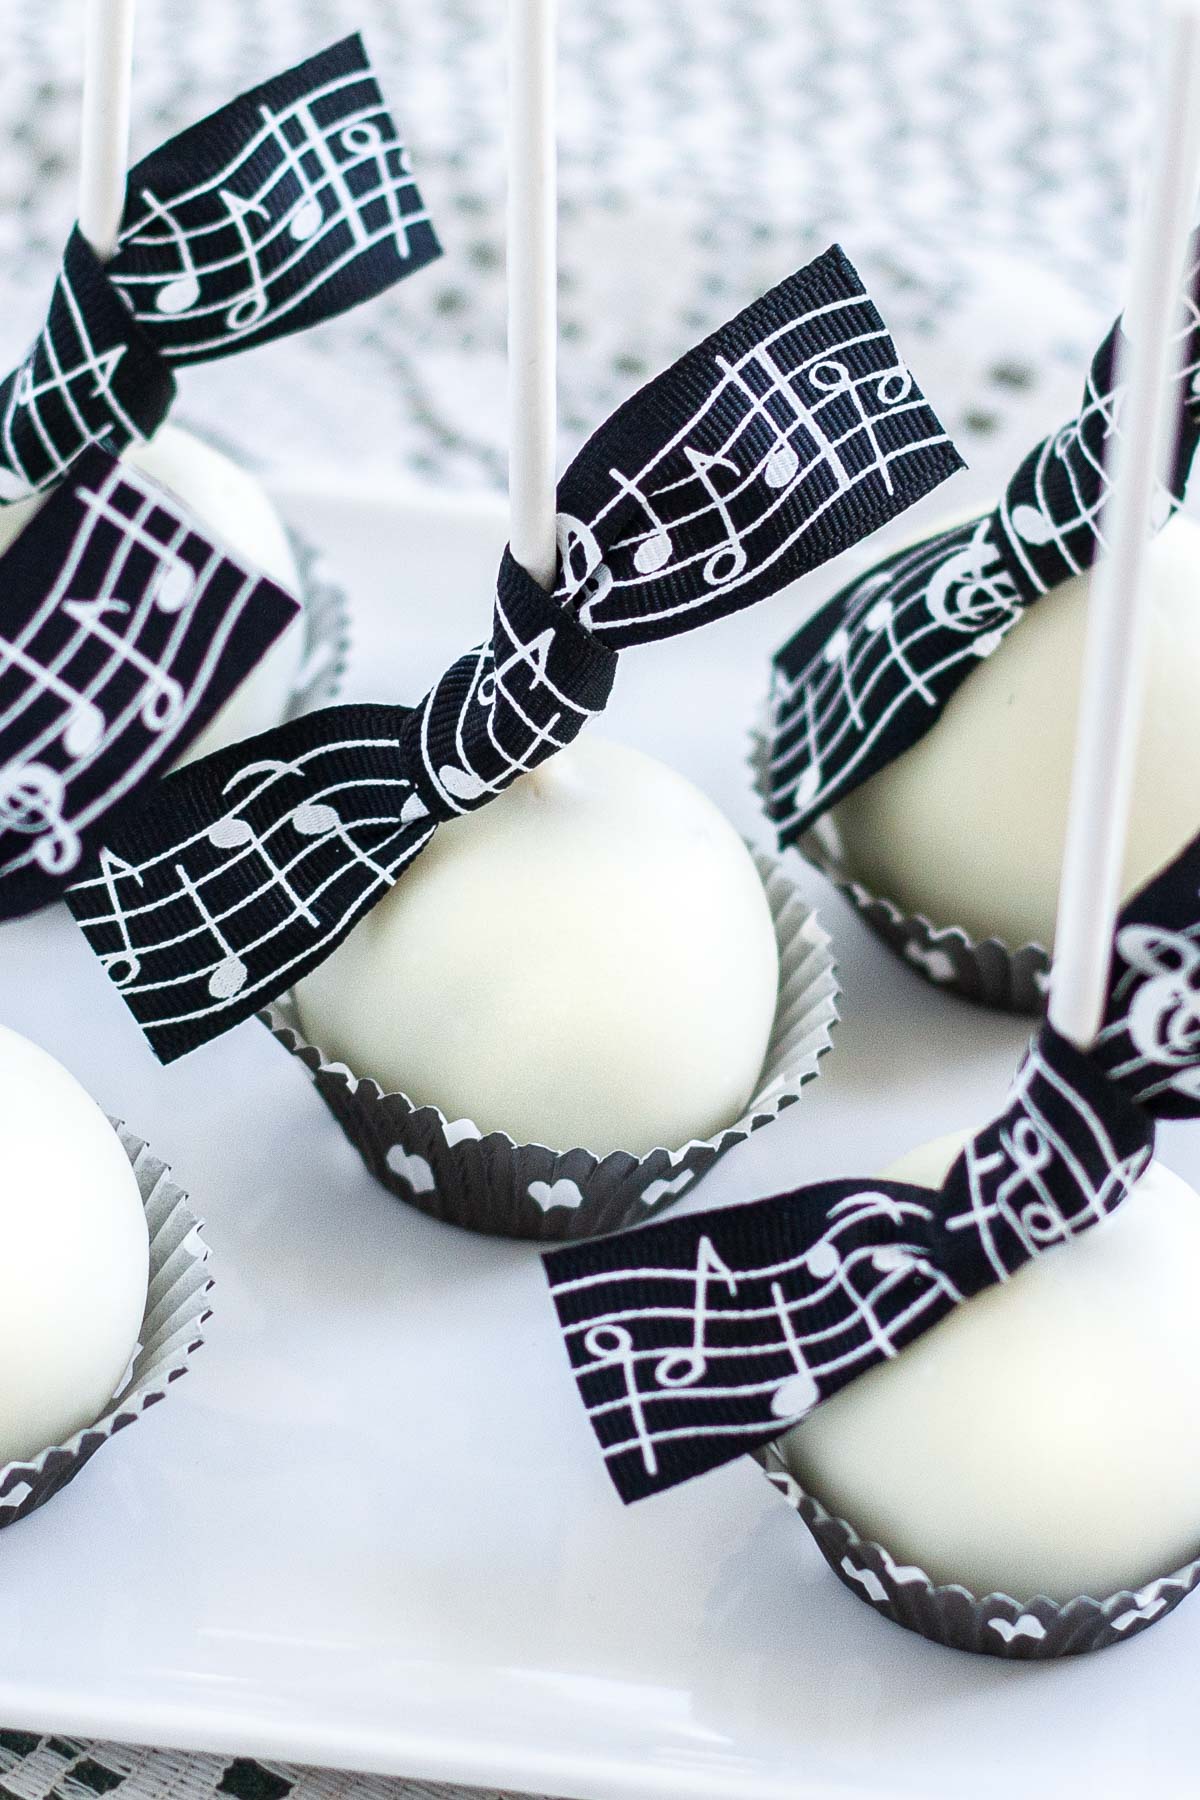 White chocolate coated cake pops with black music themed ribbon tied around the lollipop stick.